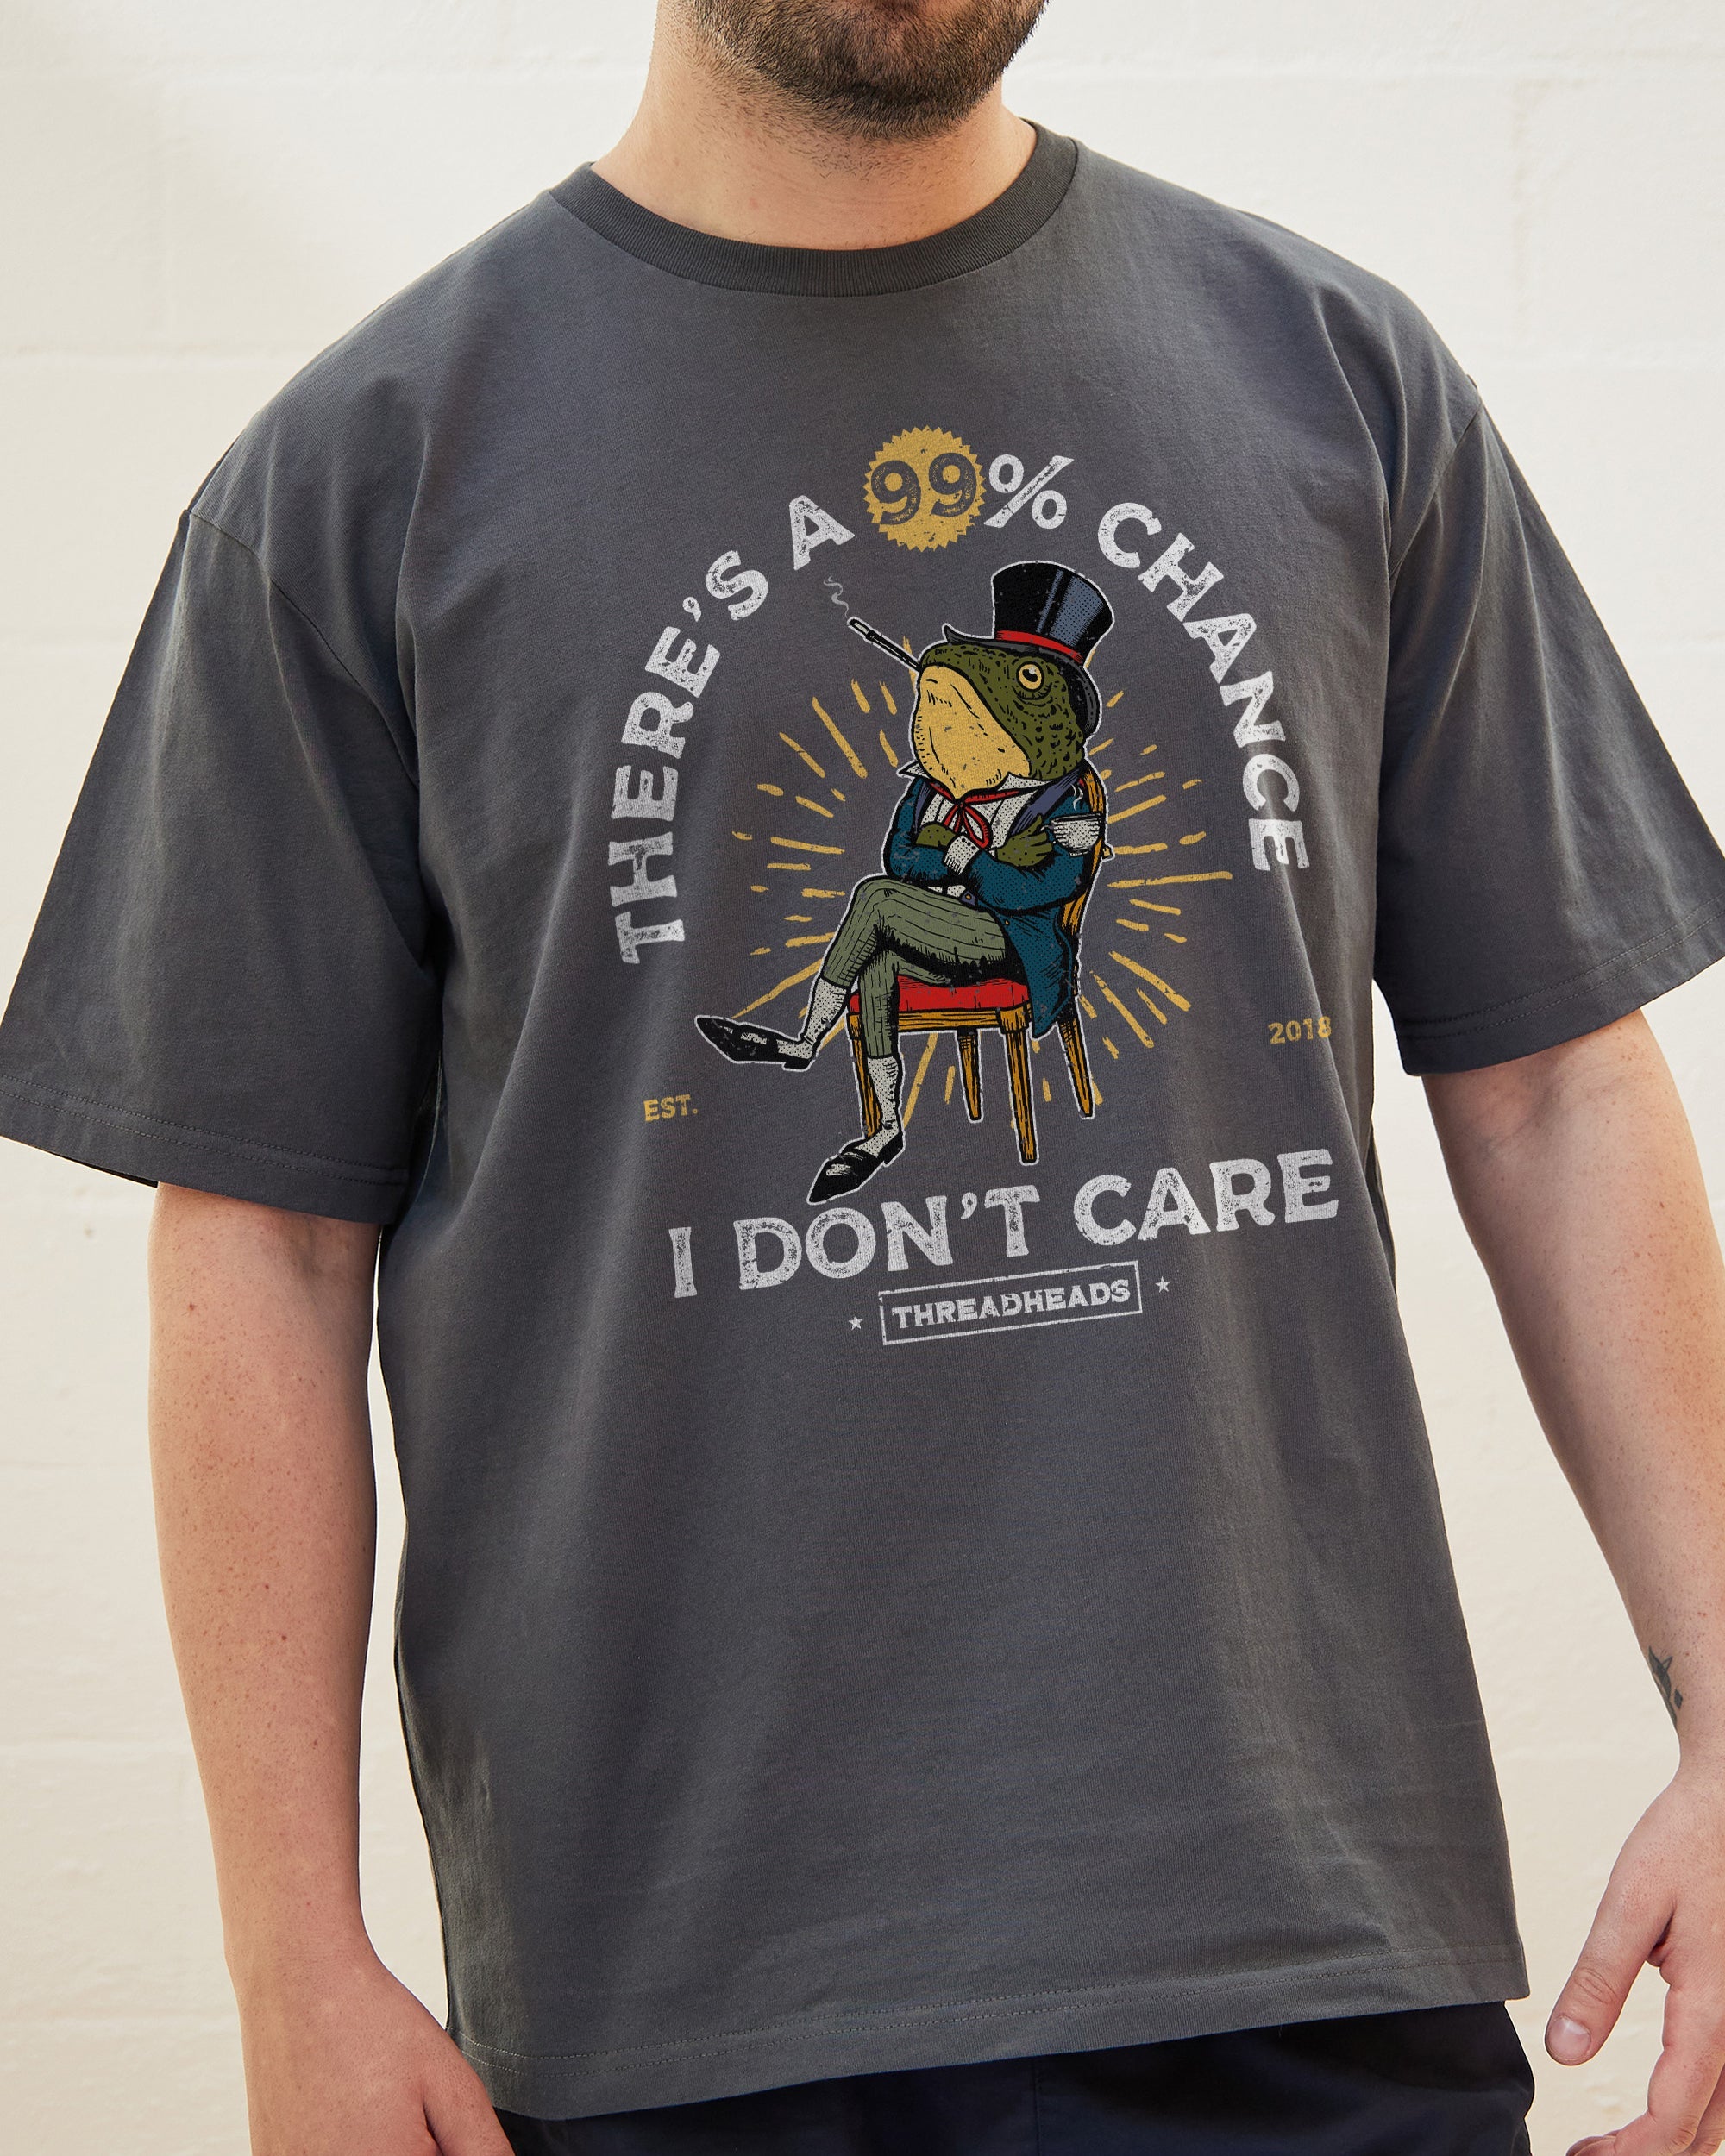 There's a 99% Chance I Don't Care T-Shirt Australia Online Charcoal